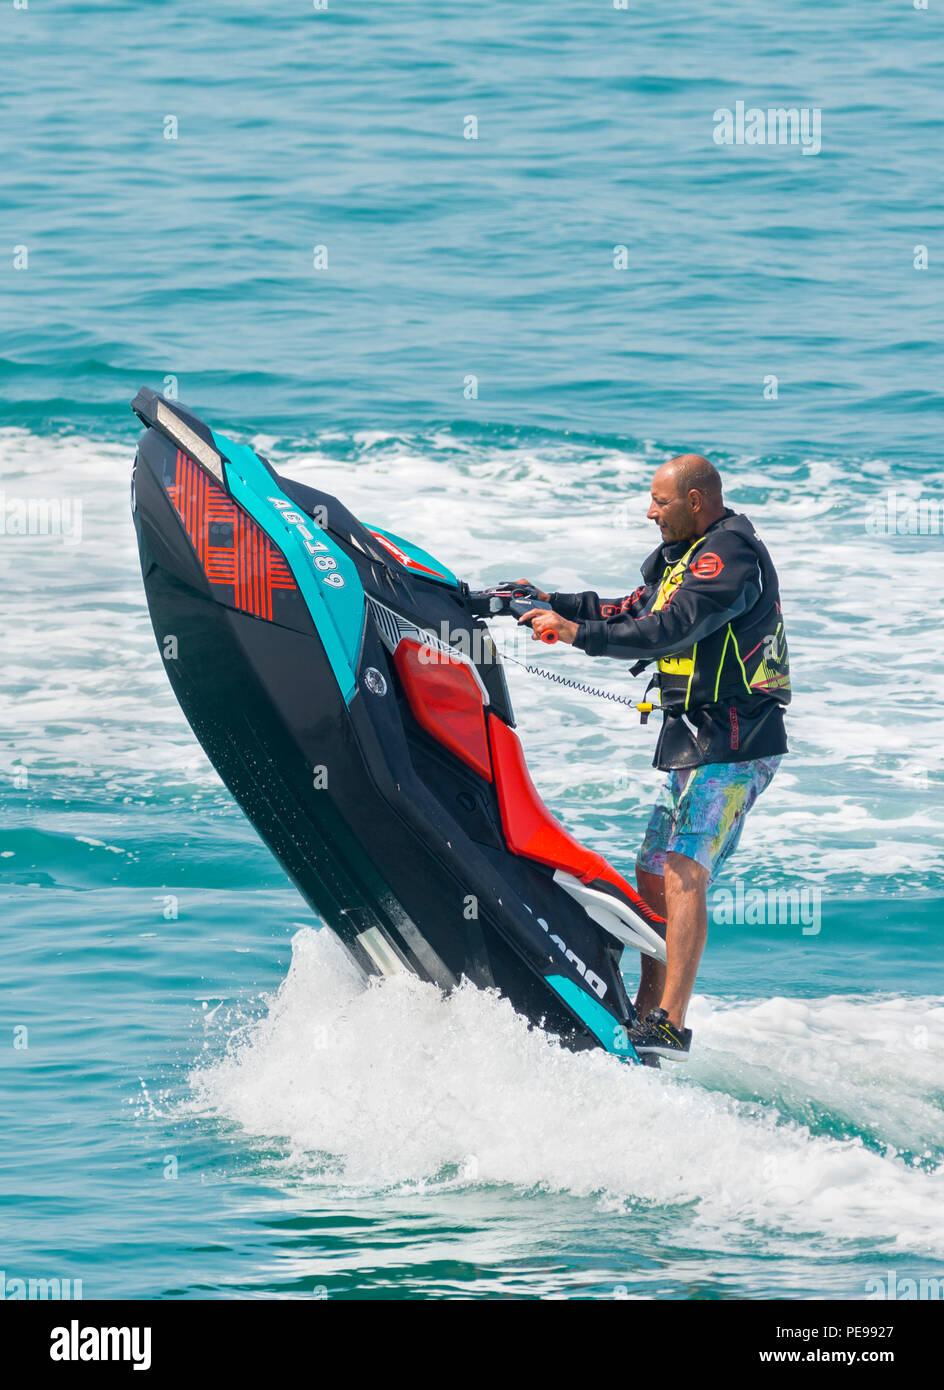 Personal Watercraft (PWC) Requirements for Hydroflight Devices